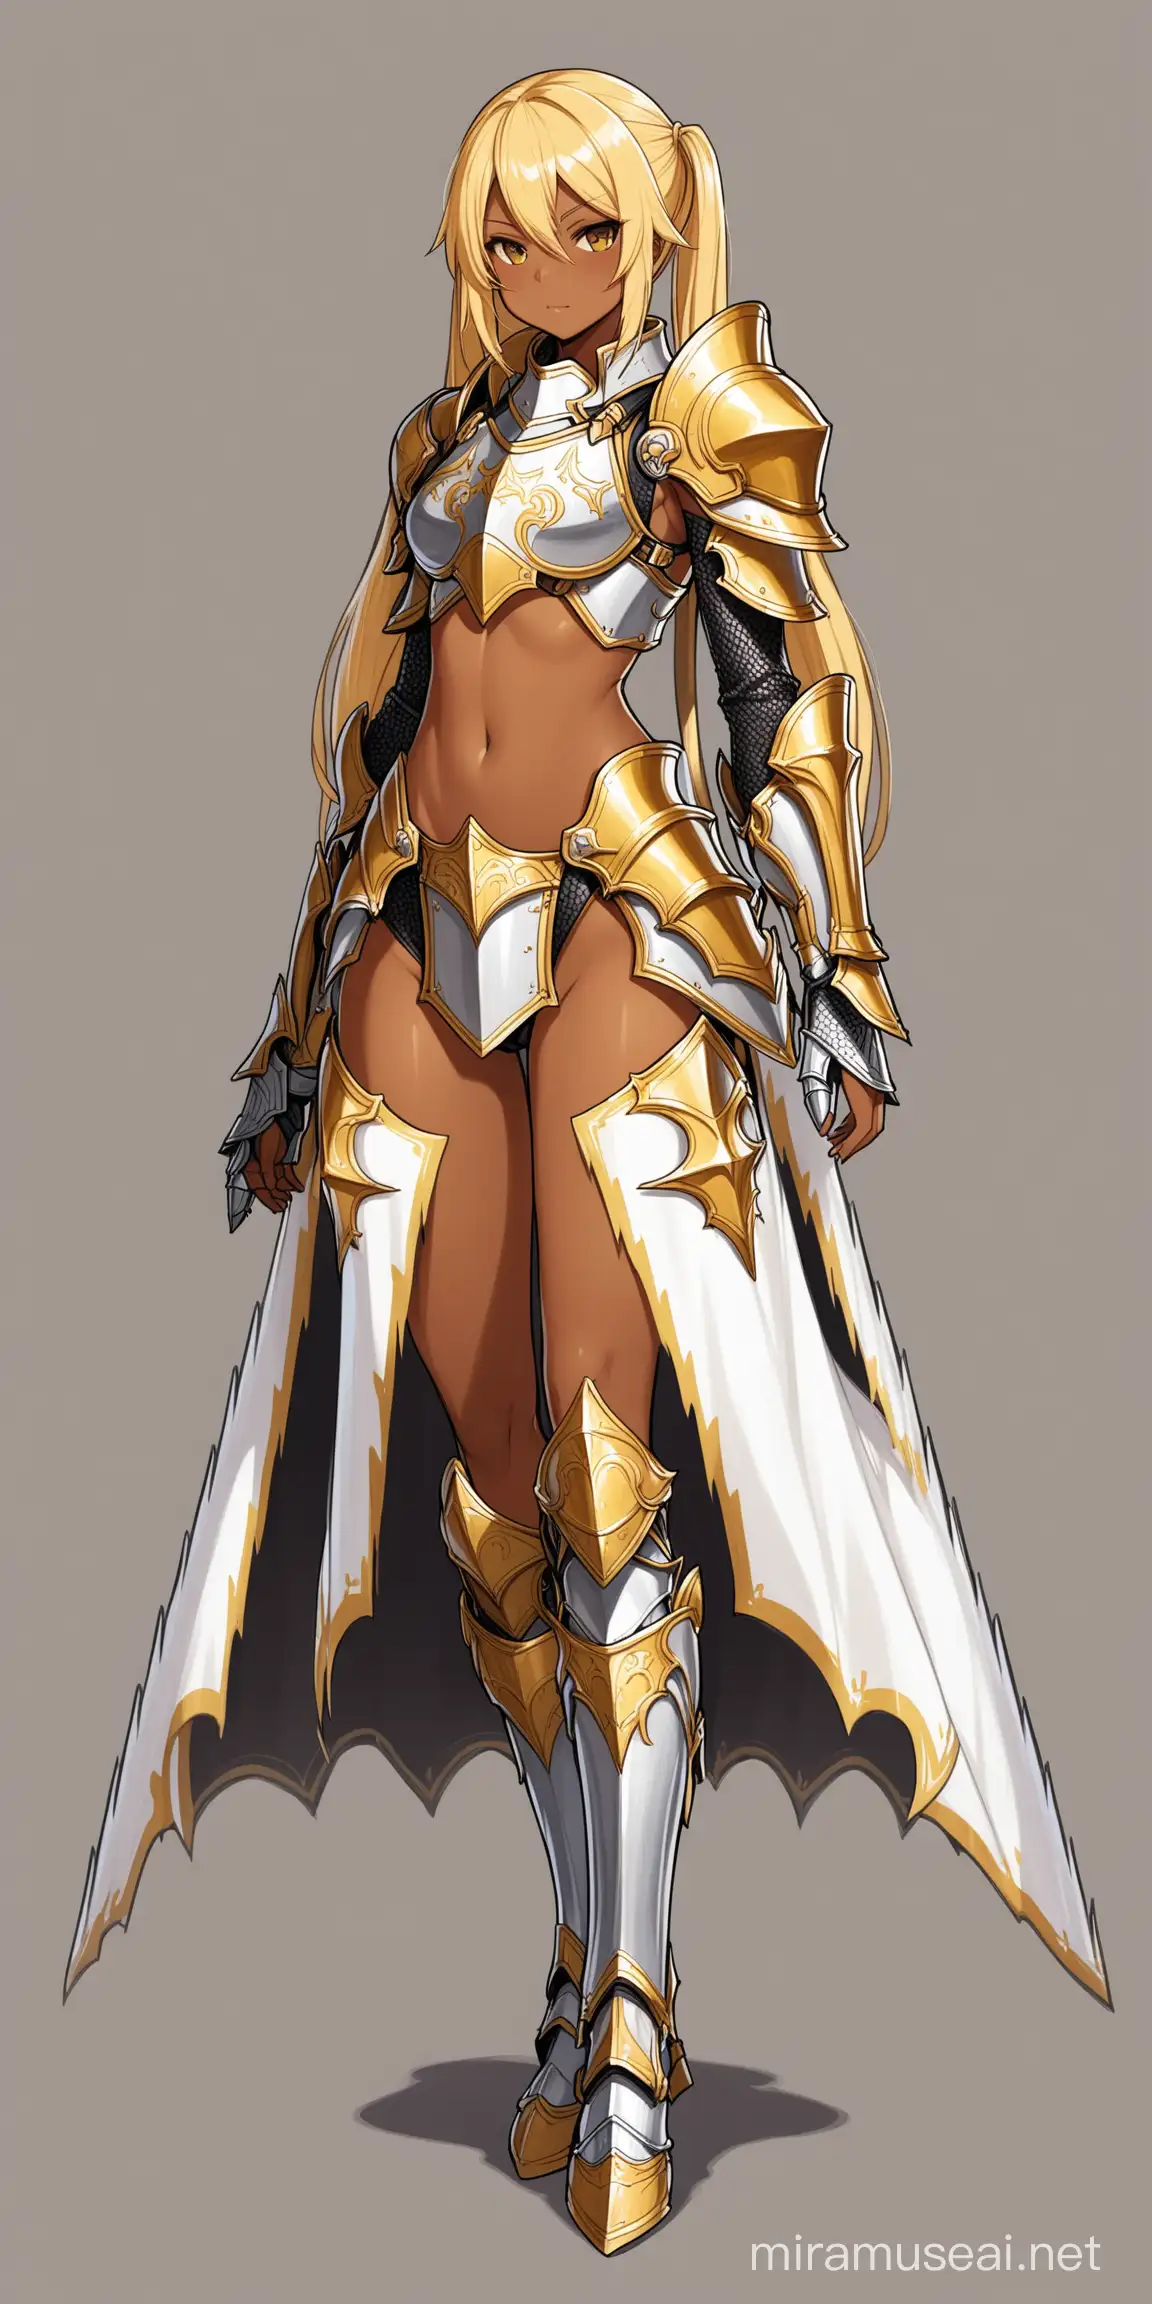 DarkSkinned Female Paladin with Blonde Twin Tails in Sexy Armor